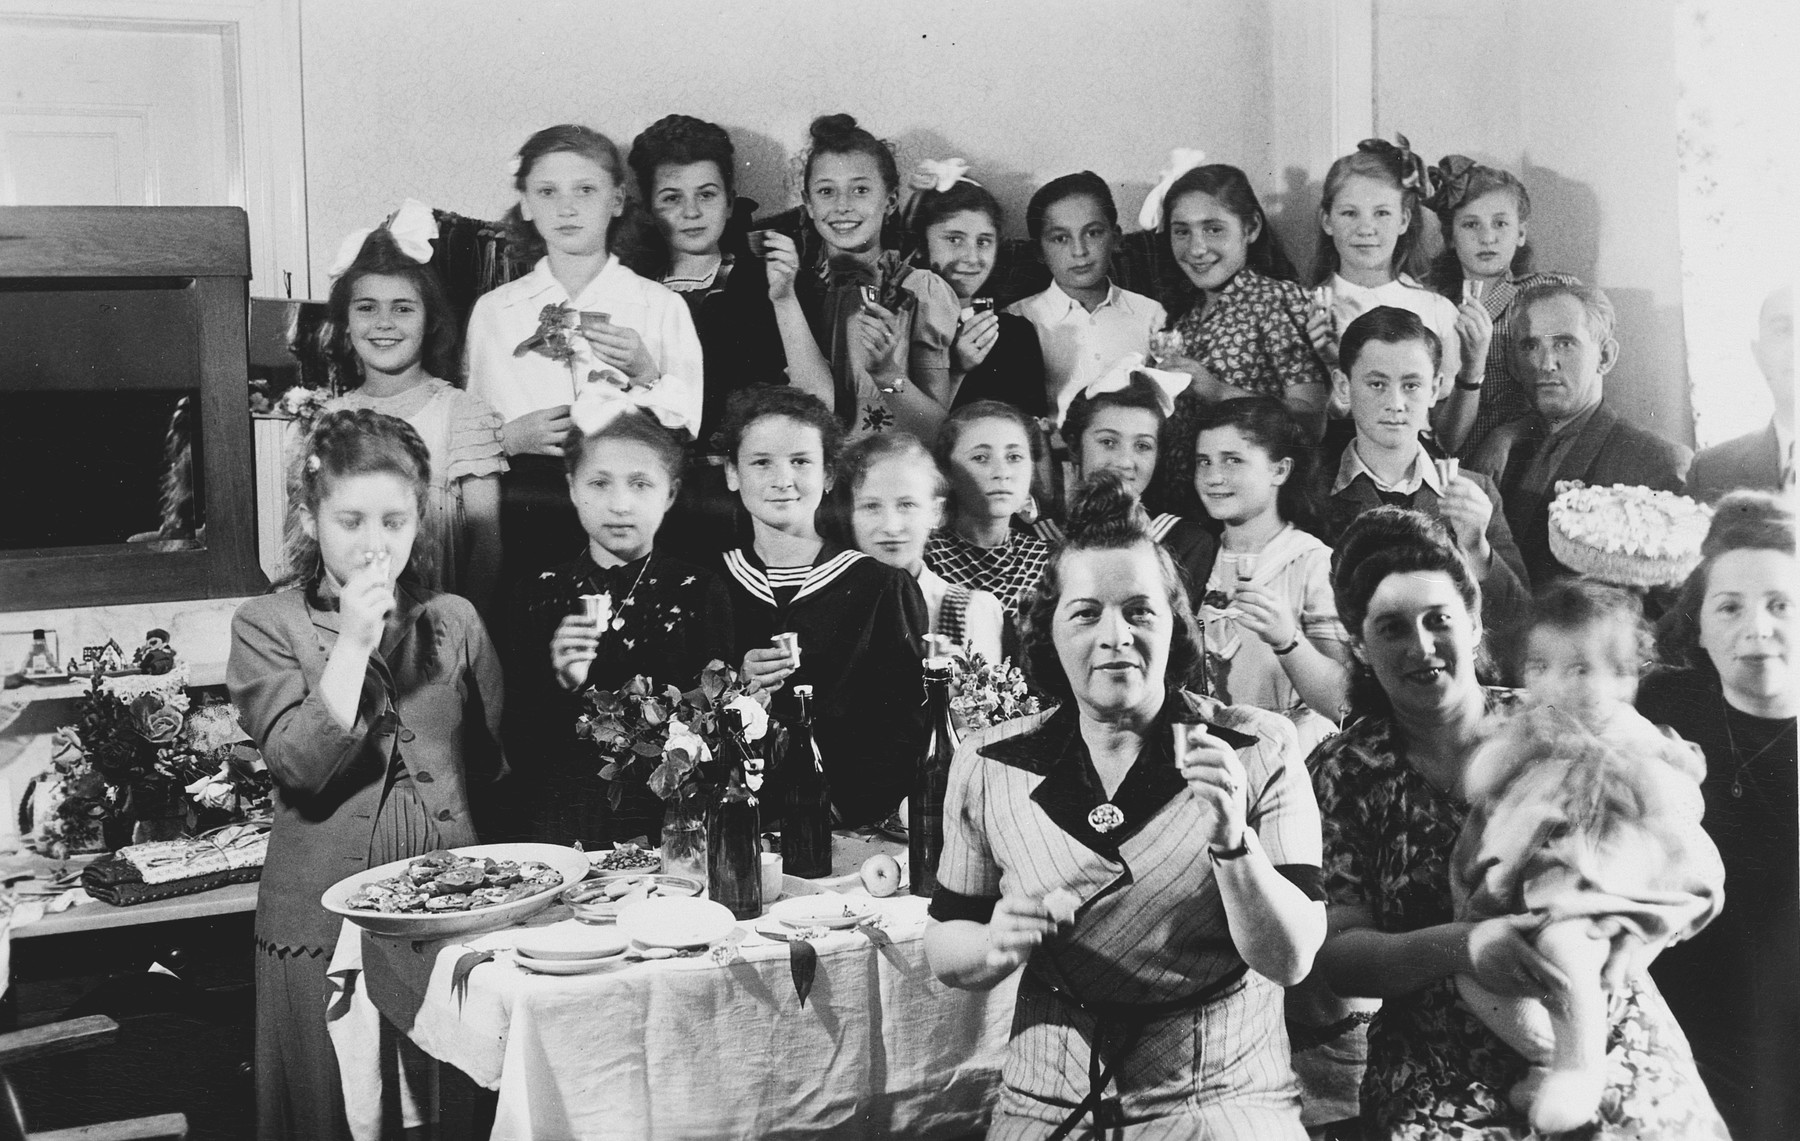 School children hold small silver cups during a celebration in the Stuttgart displaced persons camp.

Among those pictured in the middle row, Irka Hechtkopf, second from the left; Rywka Weinberg, fourth from the left; Hela Huberman, seventh from the left and Lova Warszayczyk (the donor), second from the right.